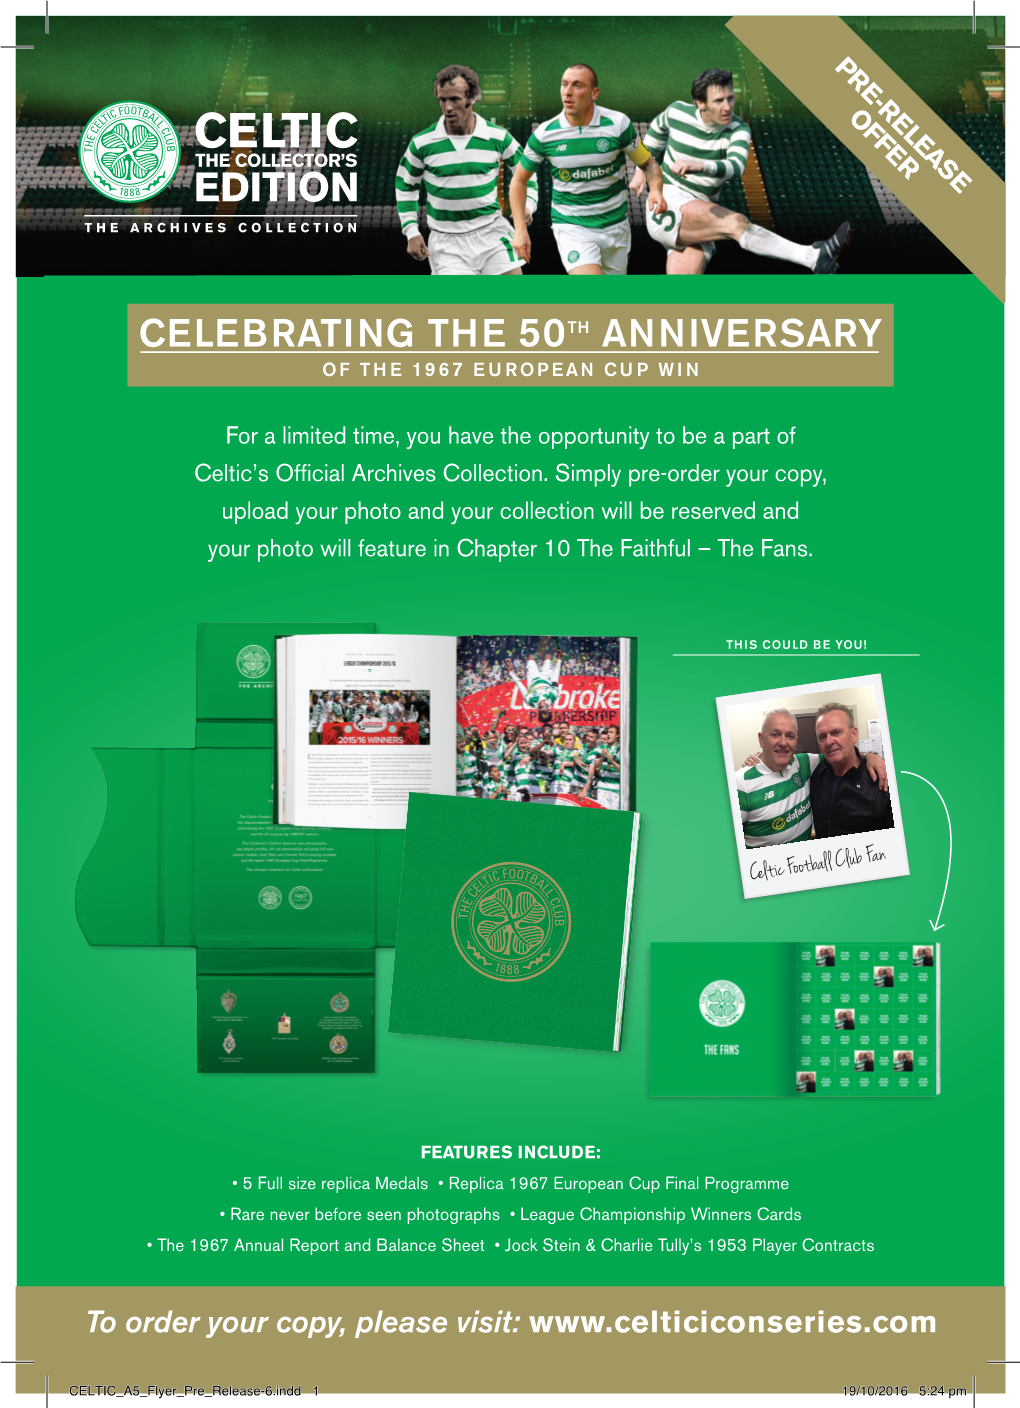 Celtic Offer the Collector’S Edition the Archives Collection